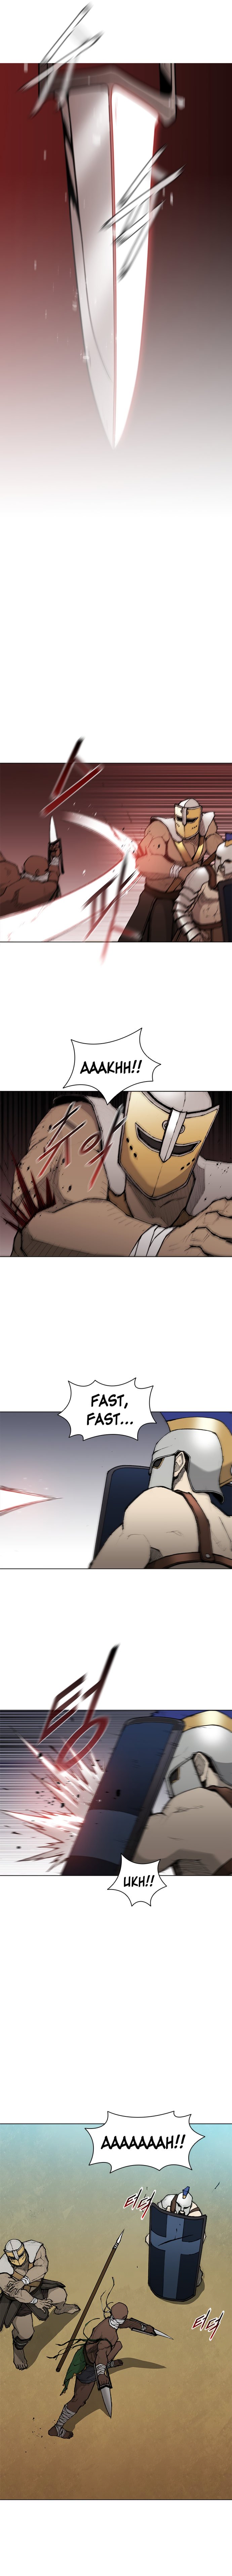 long-way-of-the-warrior-chap-39-9